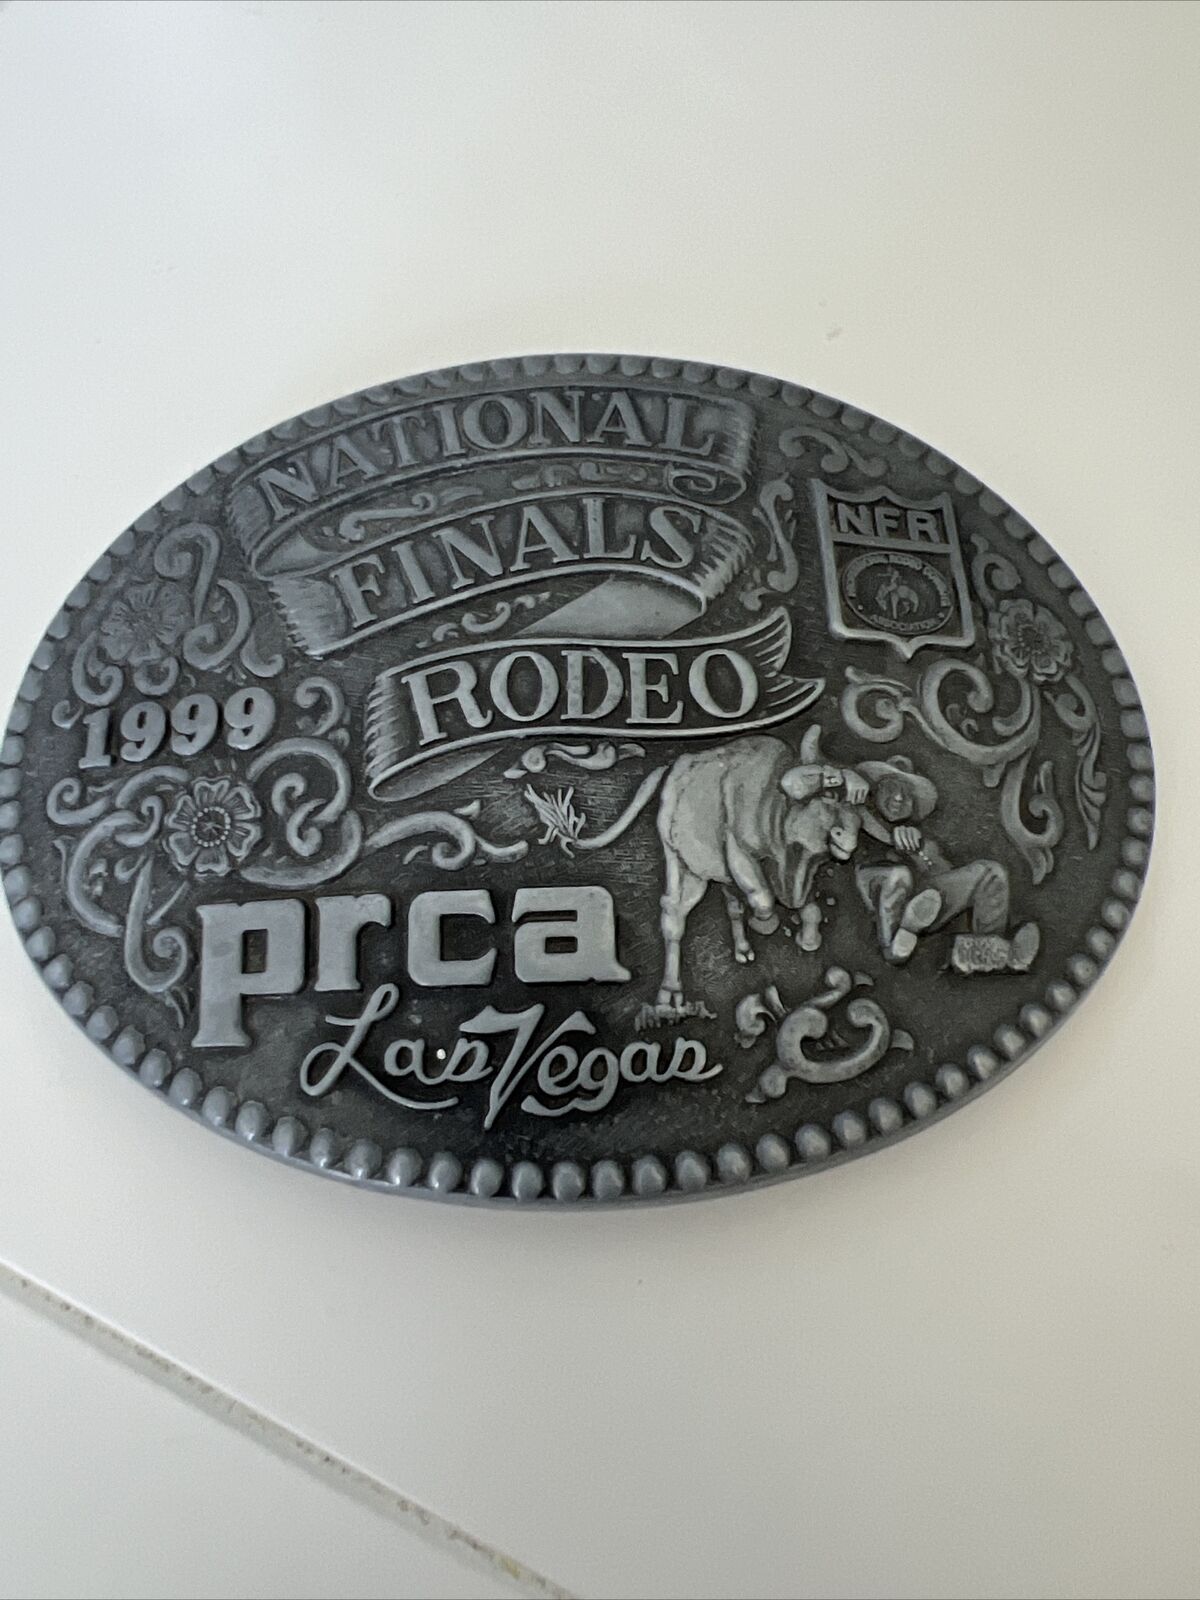 PRCA National Finals Rodeo Las Vegas Belt Buckle Limited Edition 1999